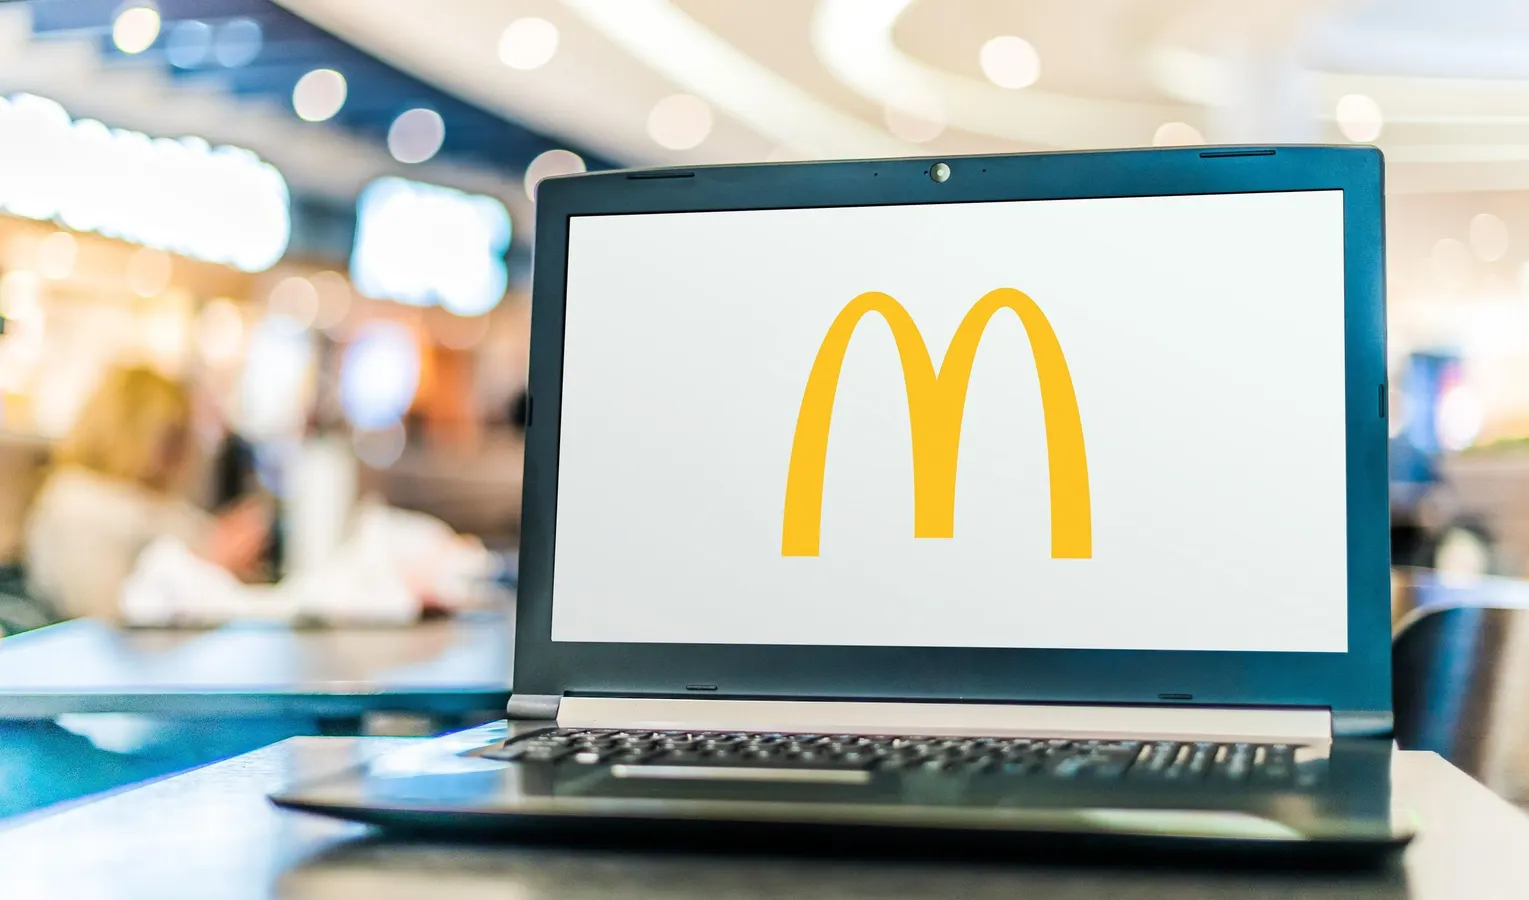 McDonald's long-term strategy prioritizes digital engagement (Credits: Forbes)